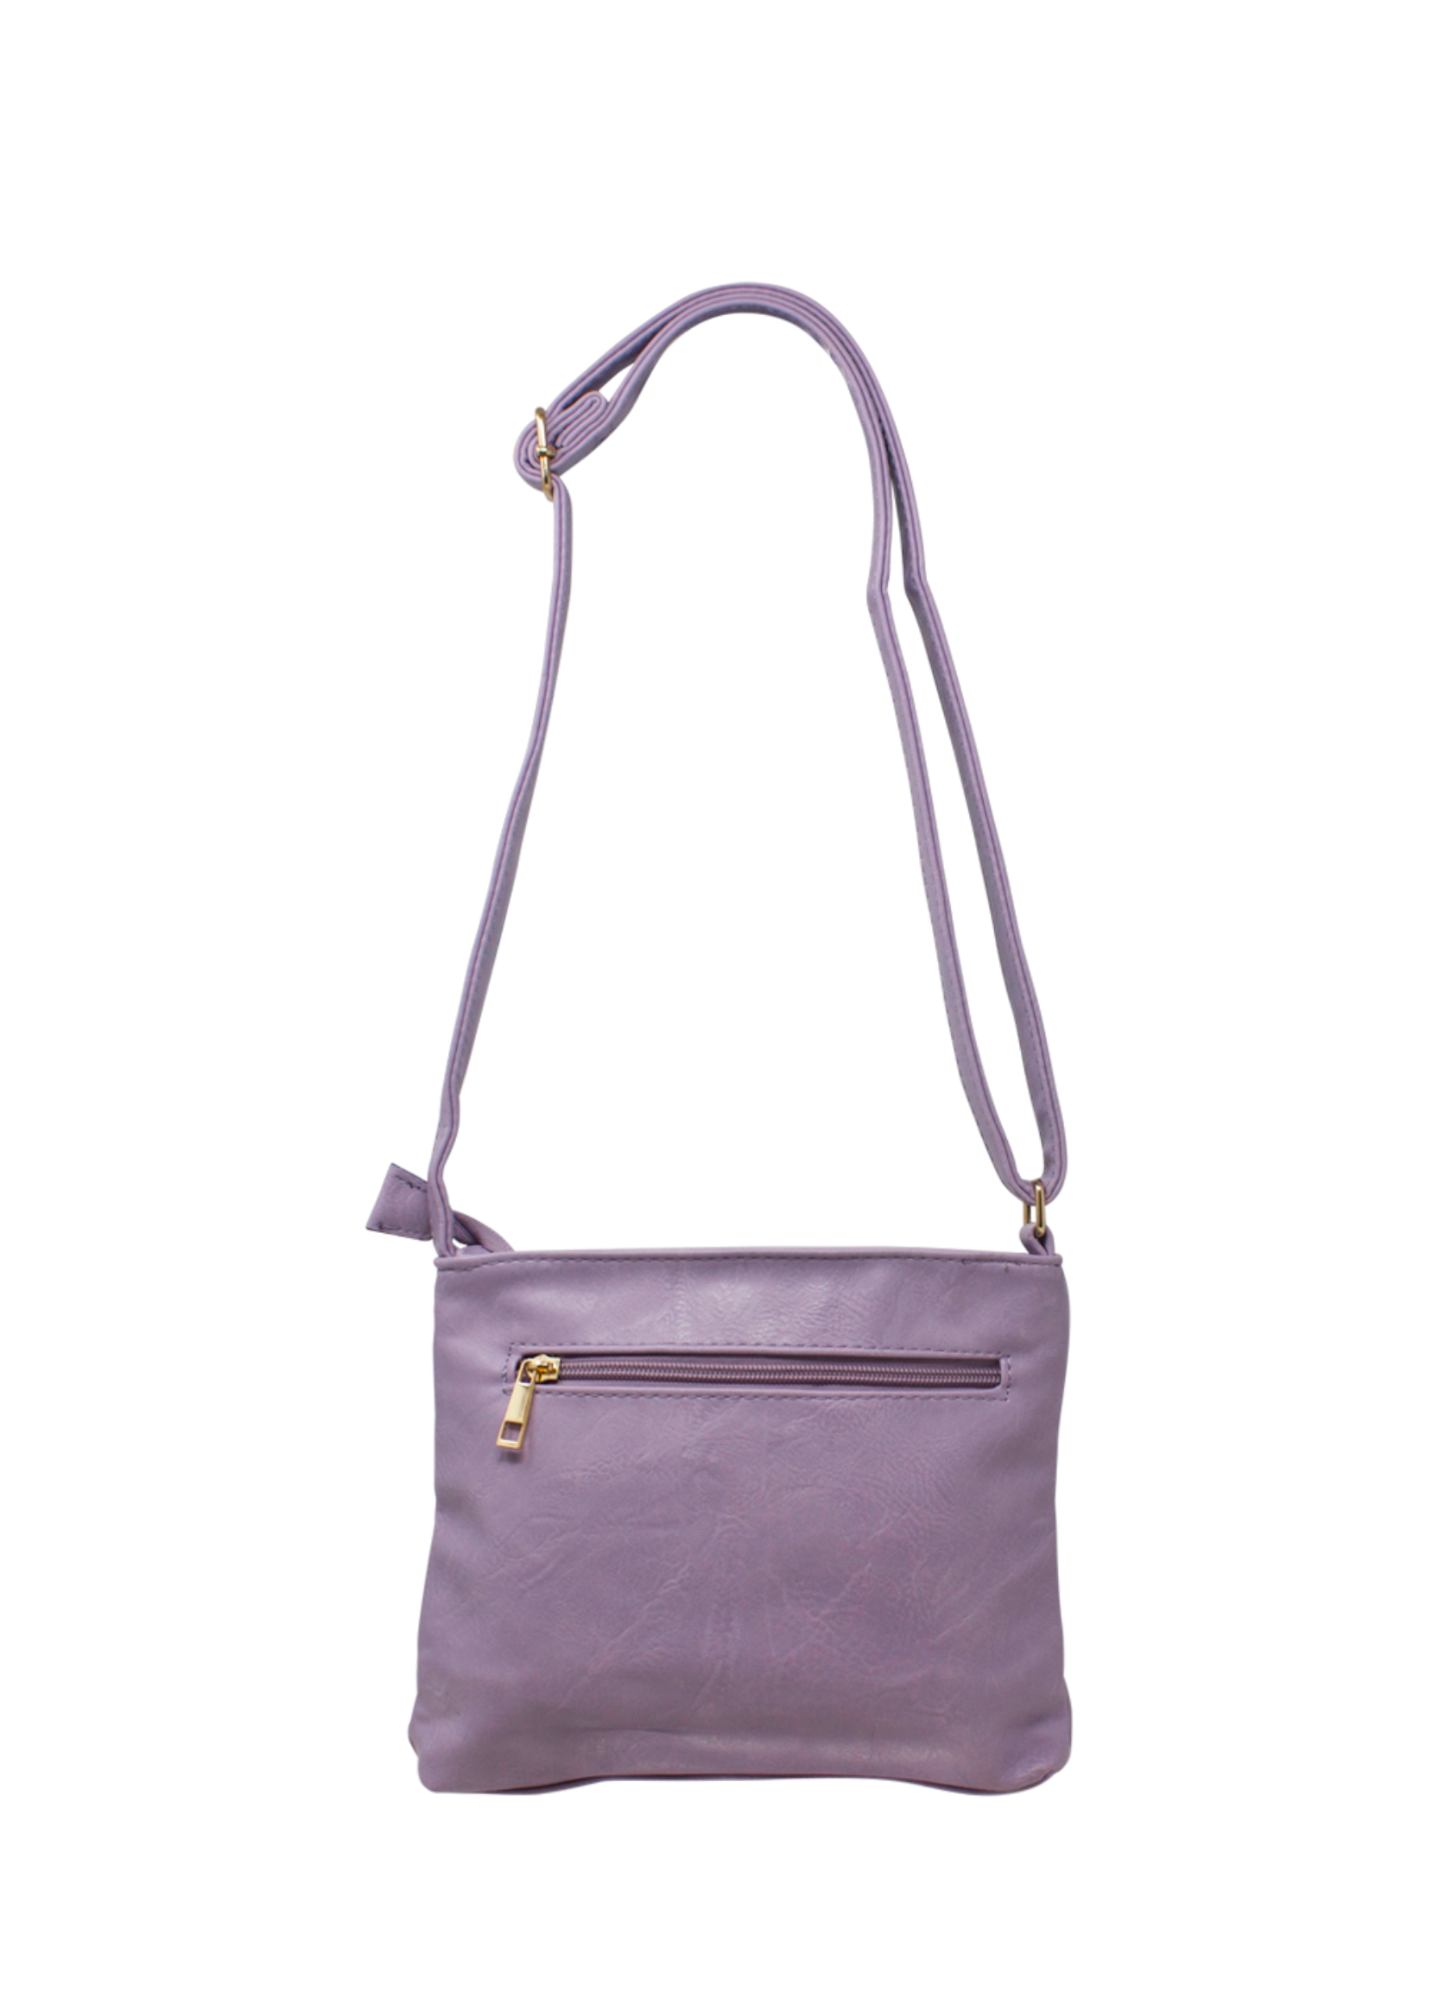 The Edit - Vintage Style Faux Leather Cross-Body Bag in Lavender